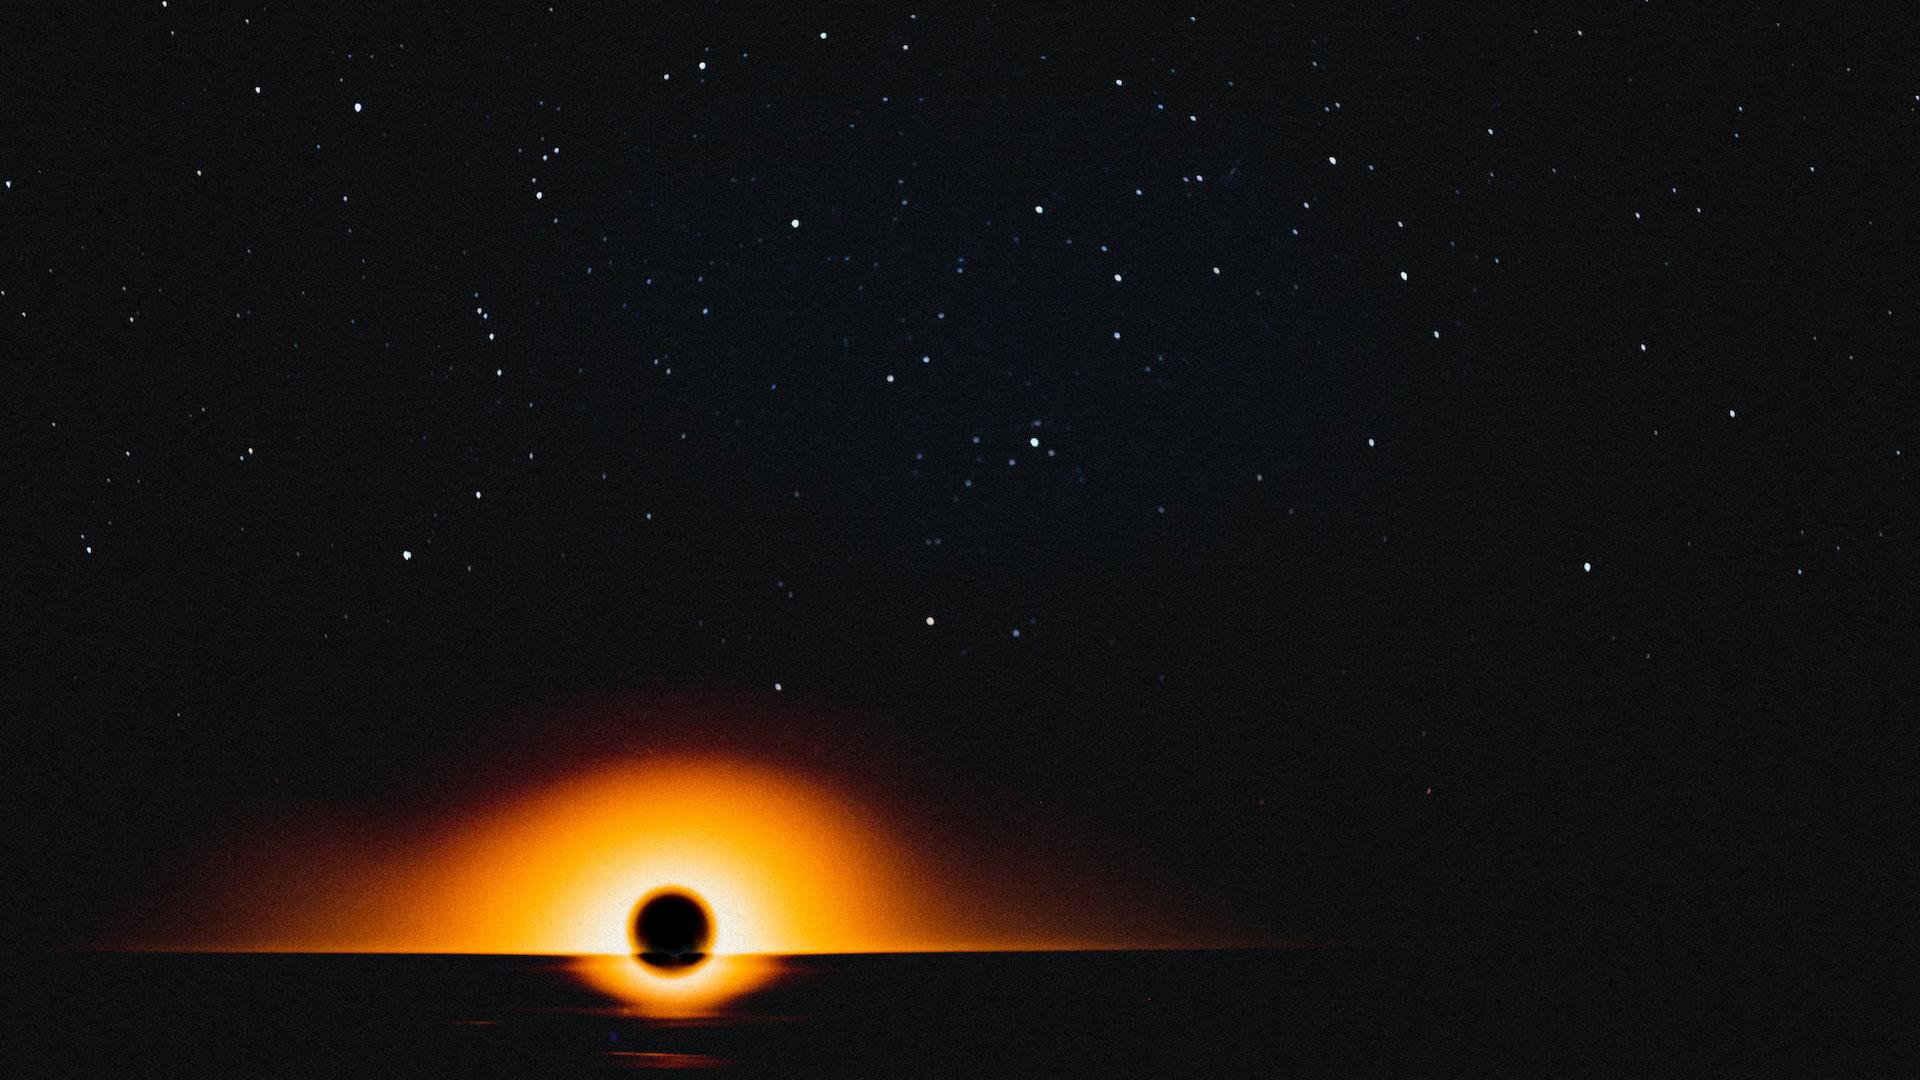 This sound creates a “black hole” in space